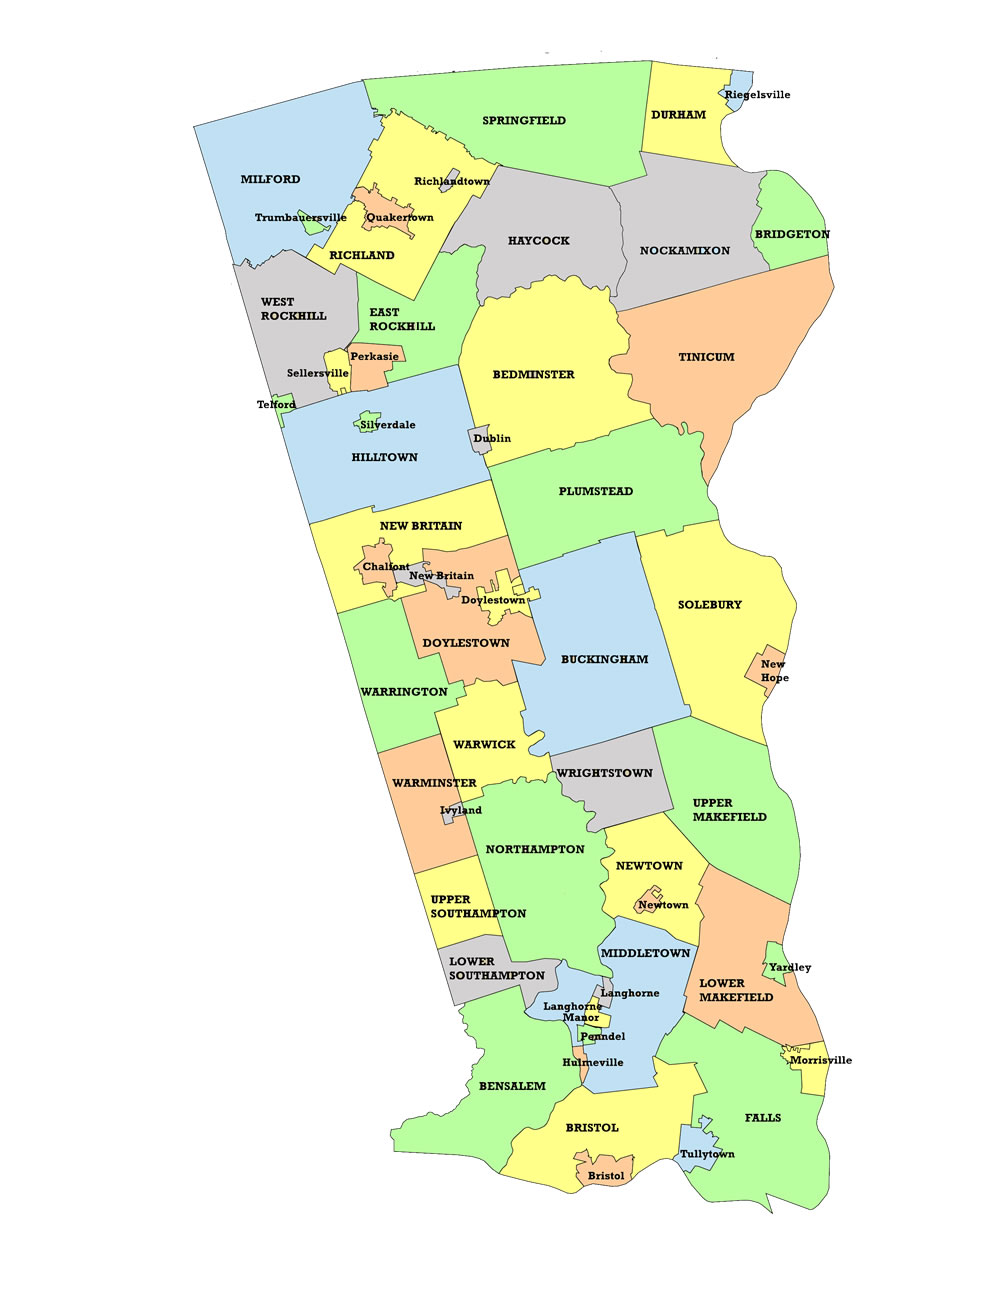 Bucks County Townships and Boroughs.